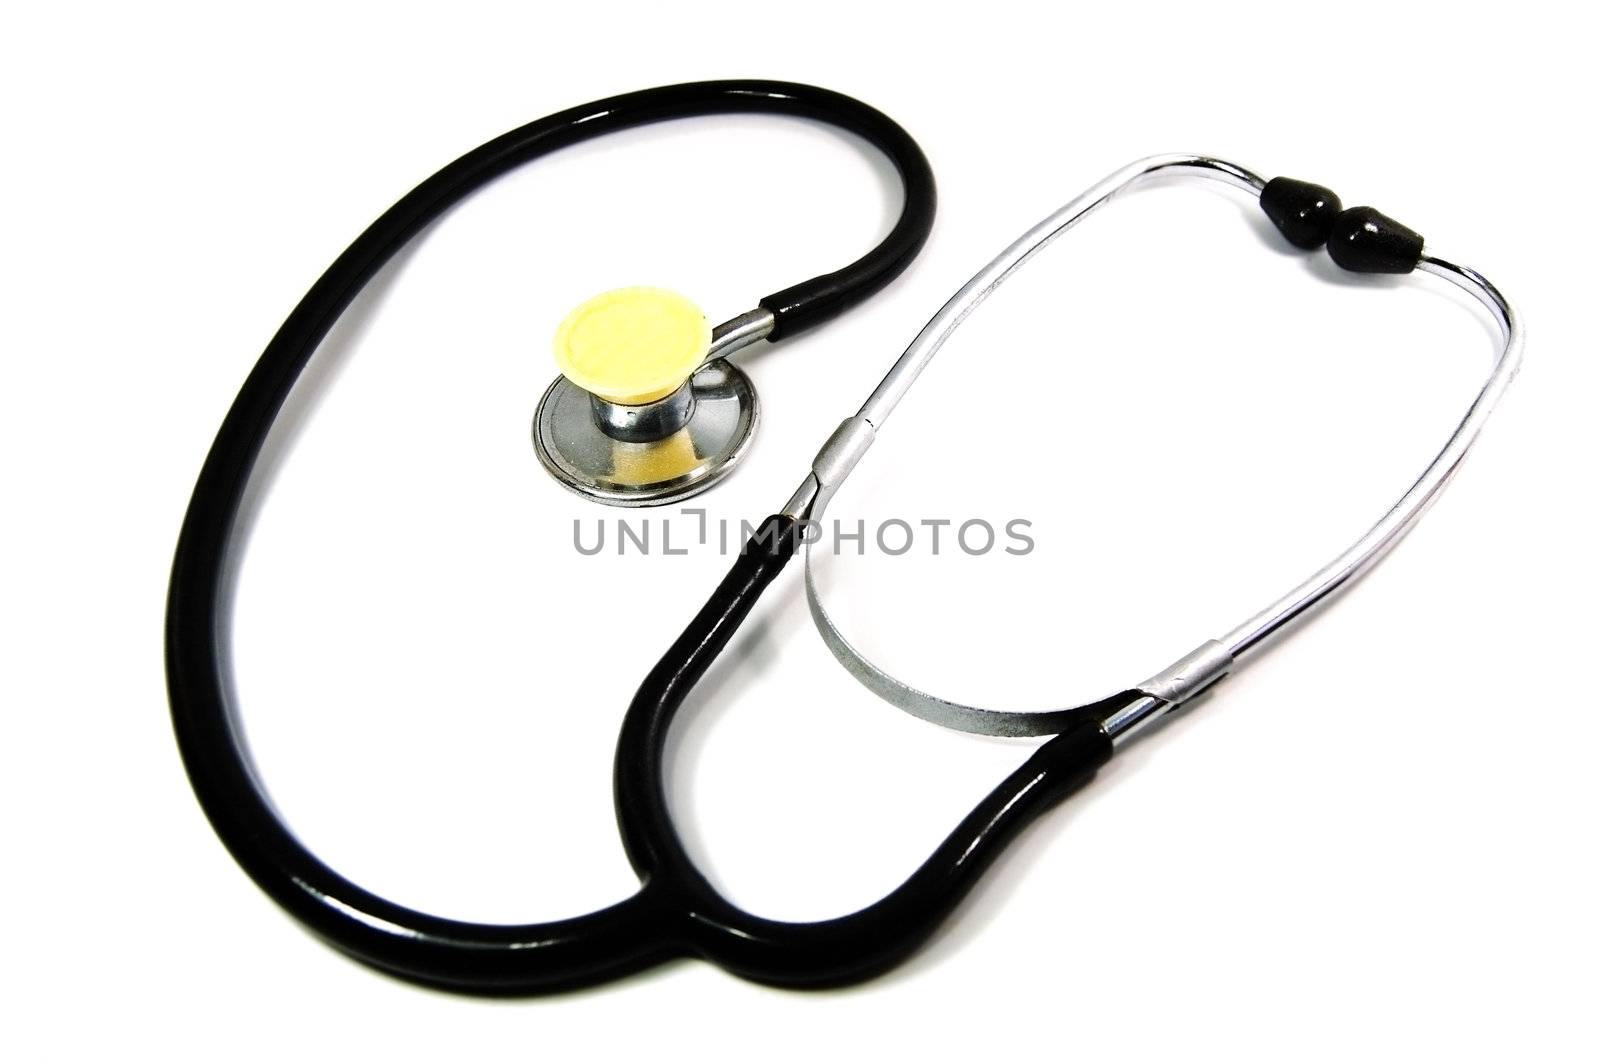 Black stethoscope by Angel_a